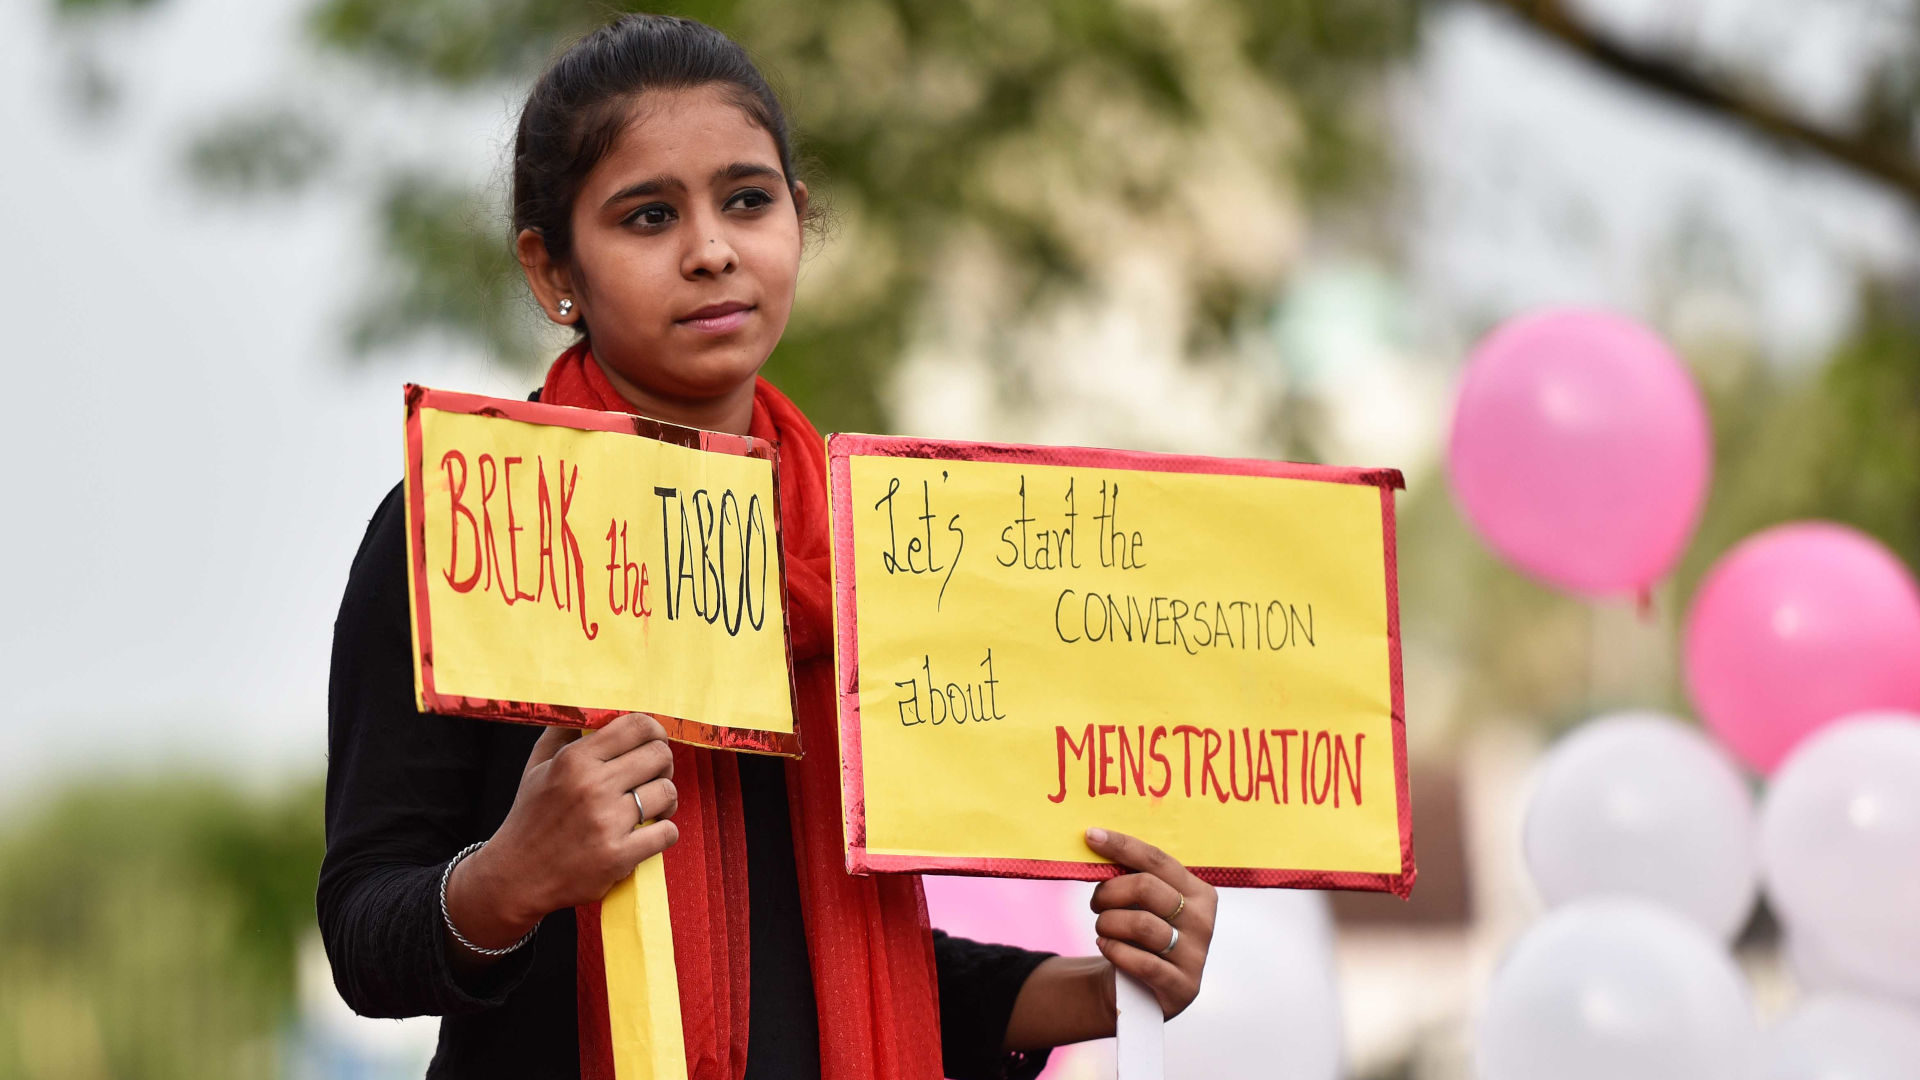 A student participates in a rally on World Menstrual Day in New Delhi, India on May 28, 2017.